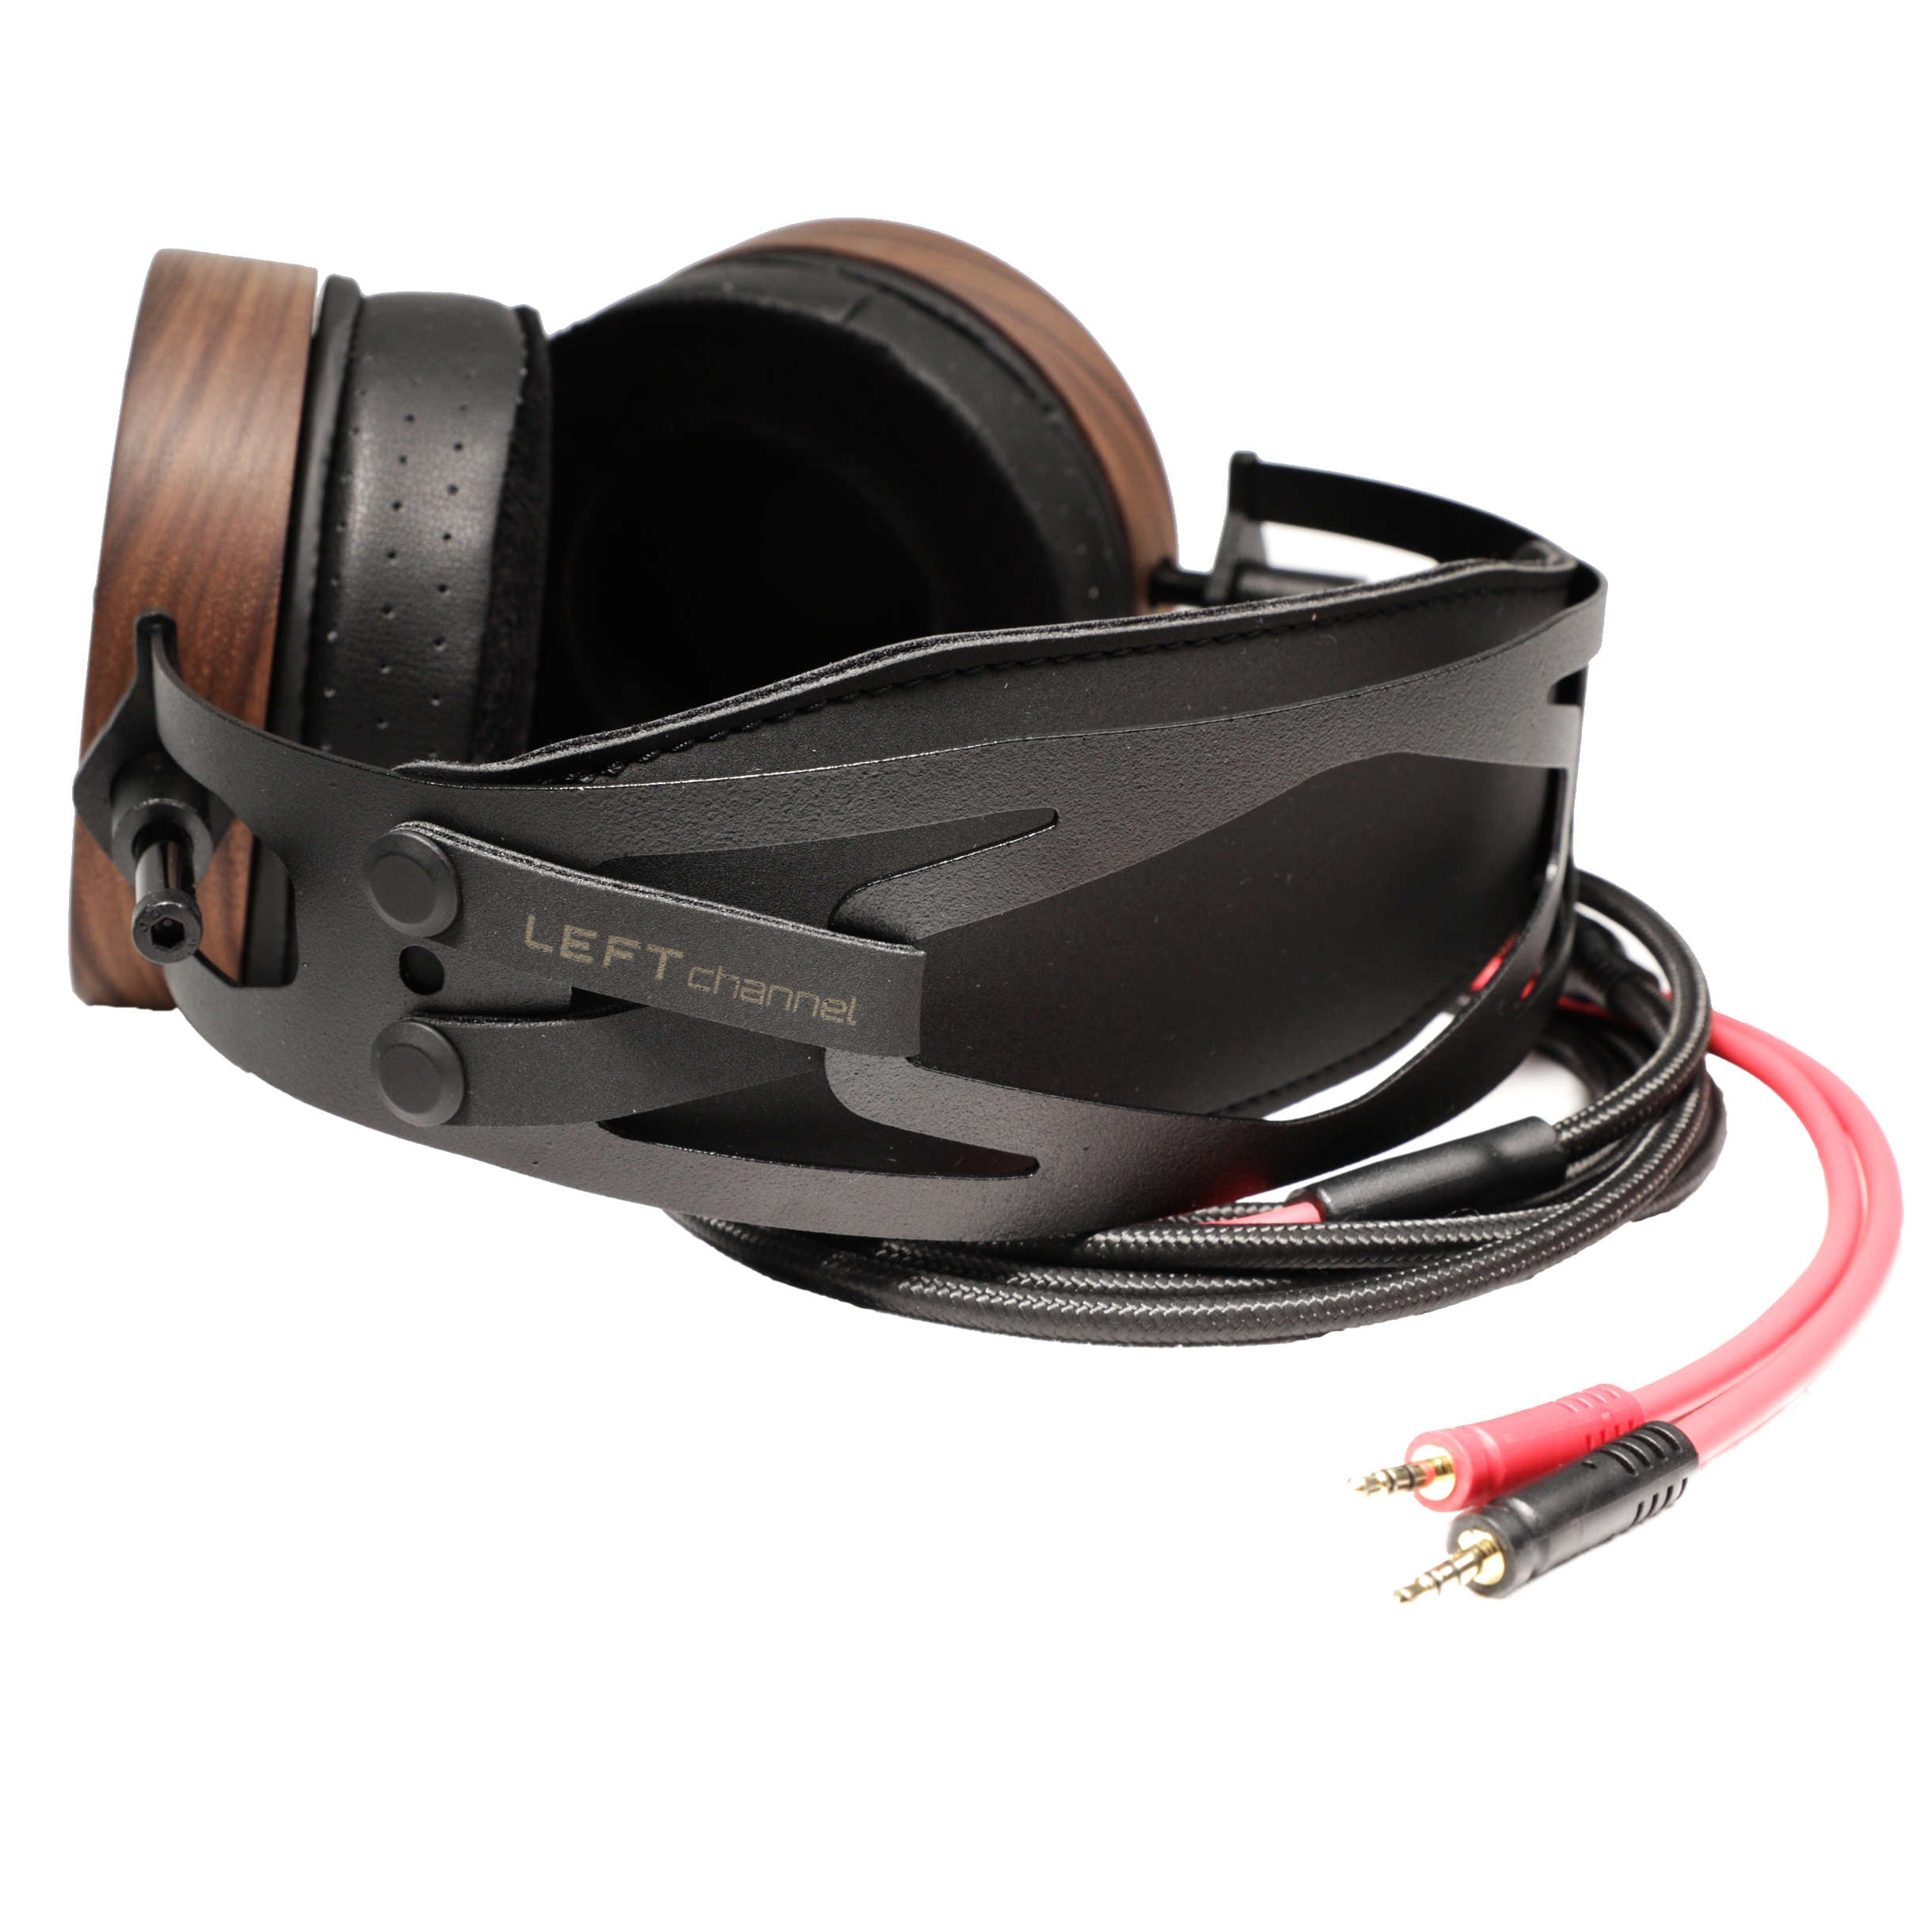 S5X 1.1 headphones for mixing spatial audio e.g. Dolby Atmos or 